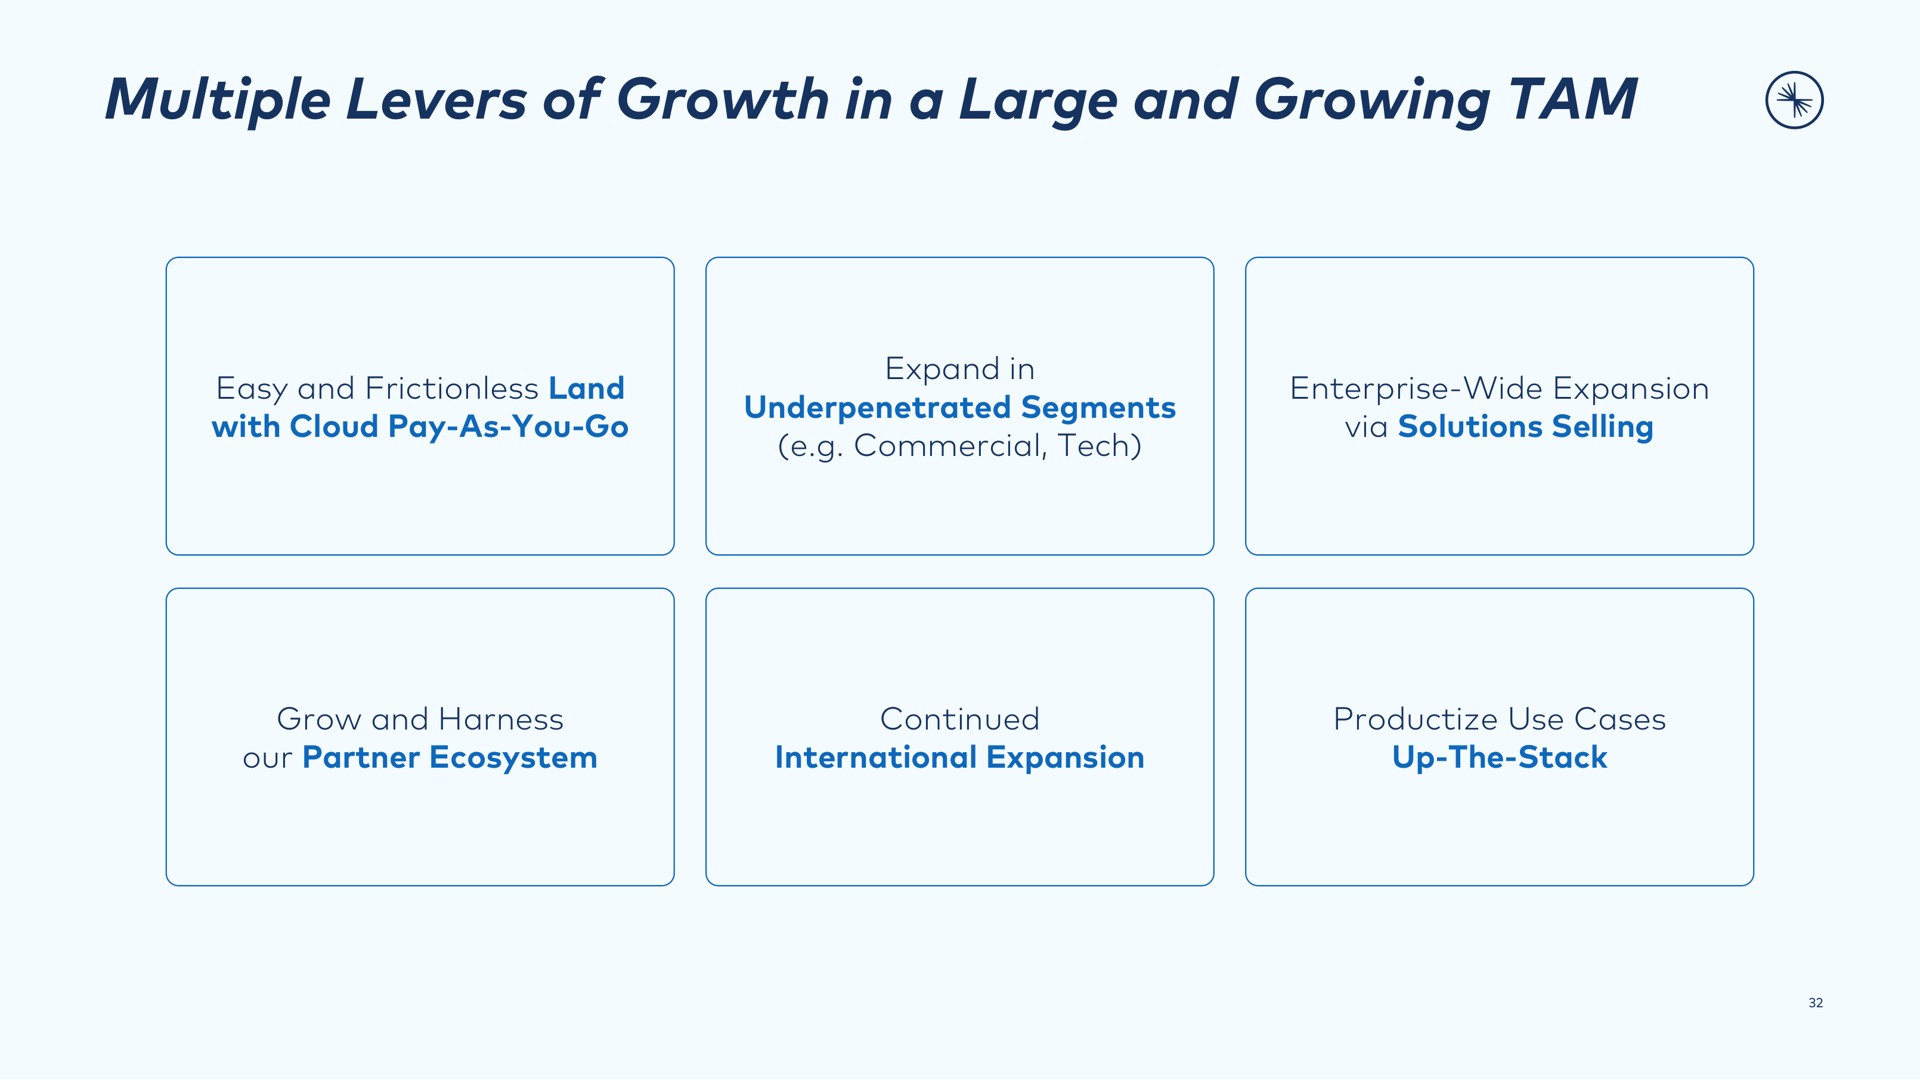 multiple levers of growth in a large and growing tam | Confluent